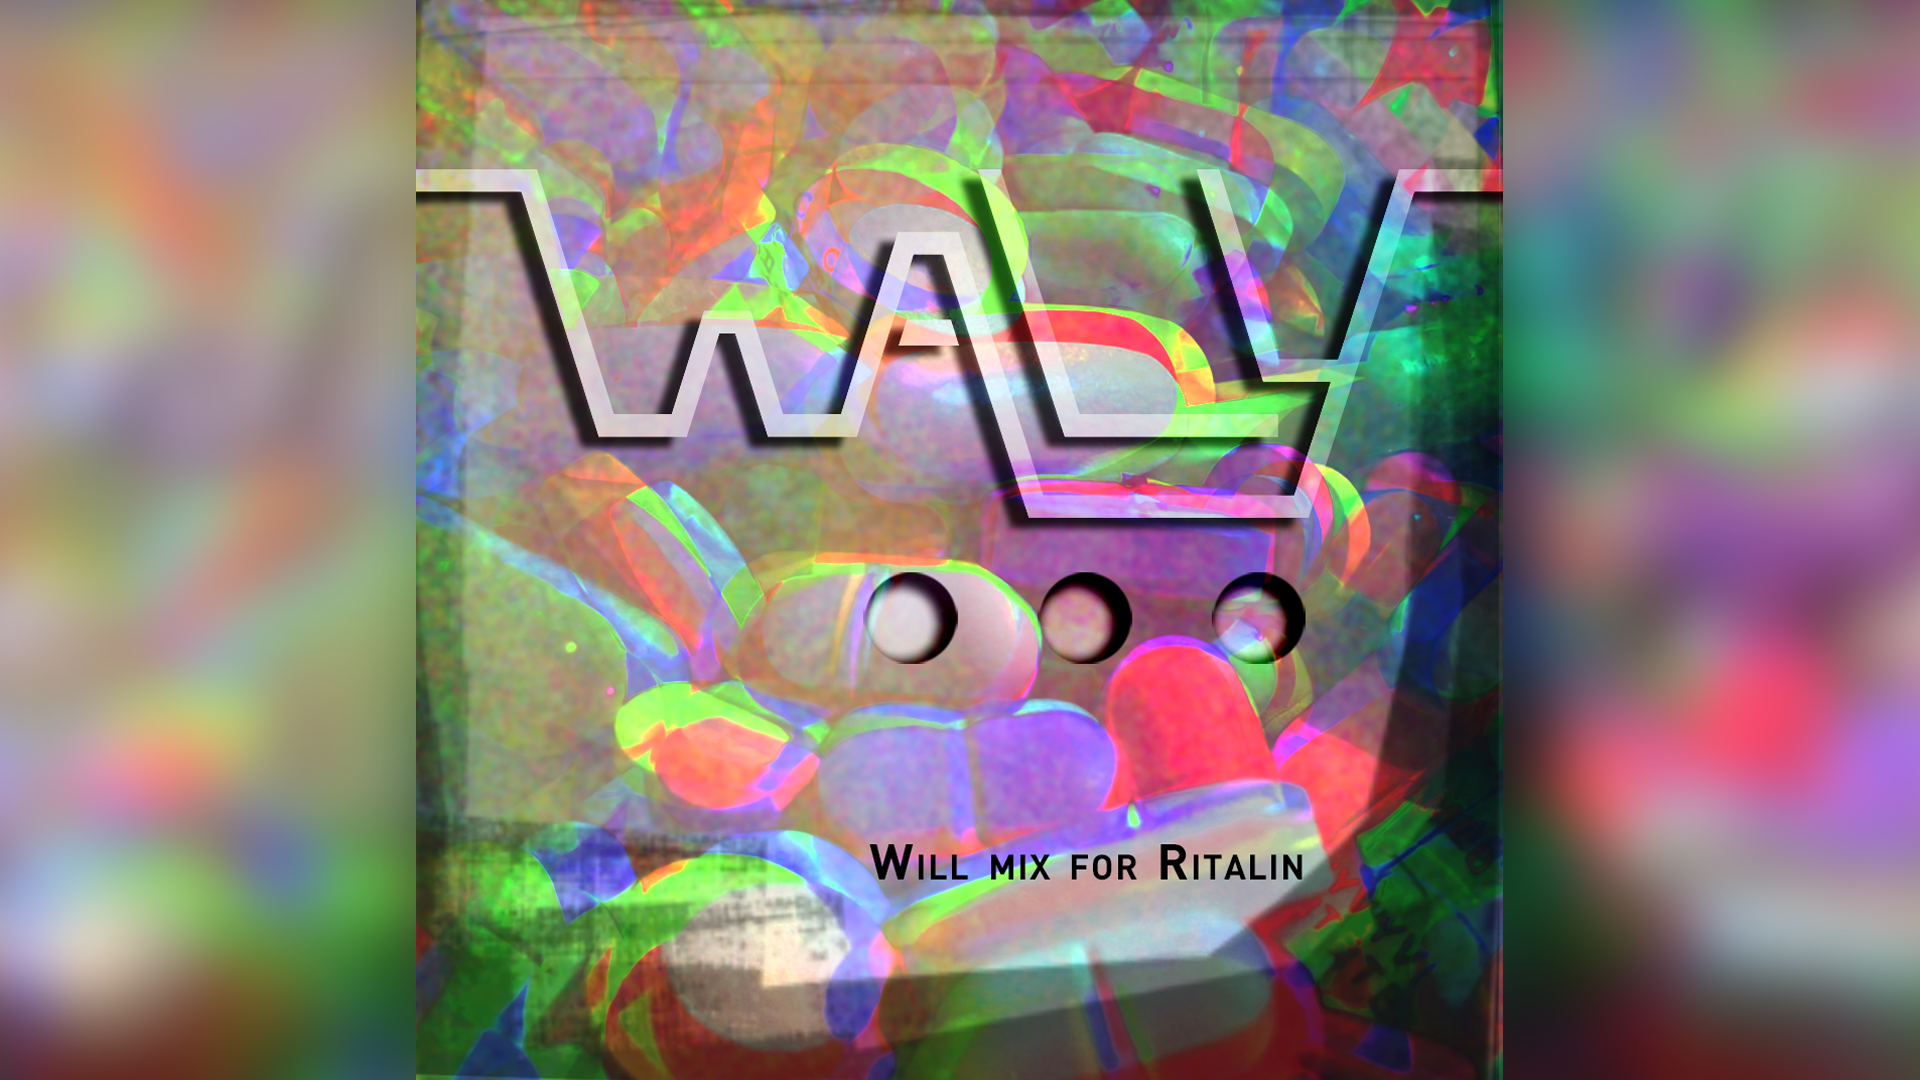 2011-11-03 – Will mix for ritalin